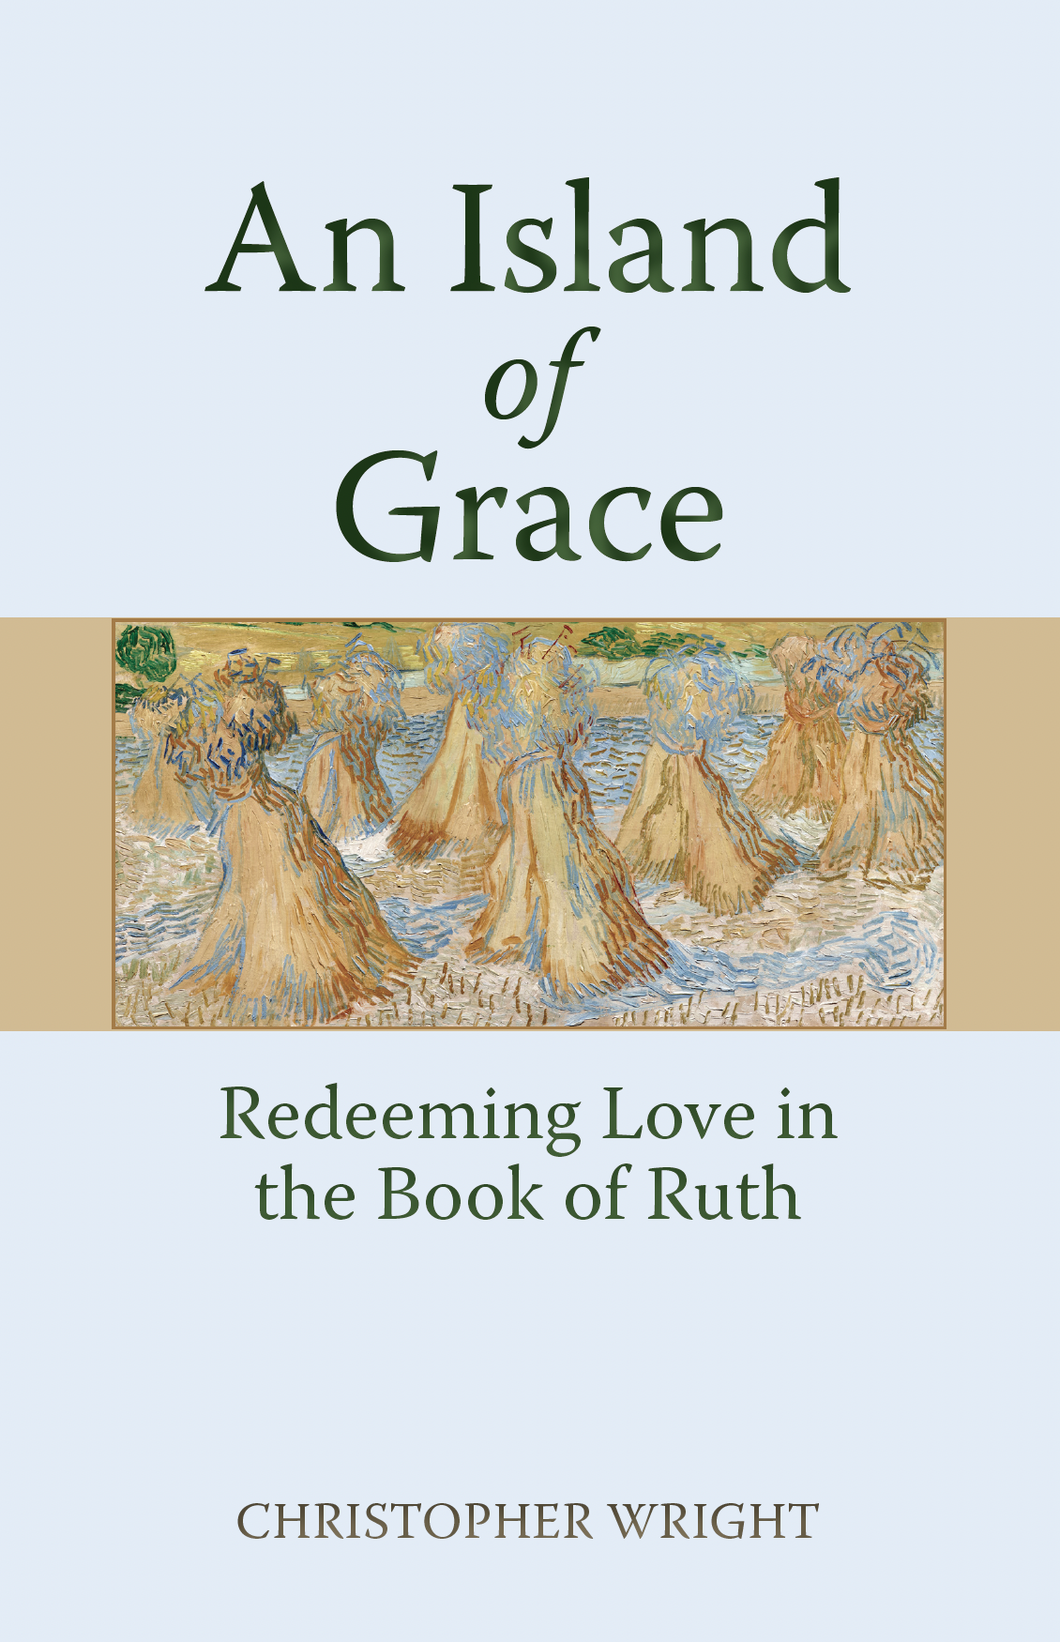 An Island of Grace: Redeeming Love in the Book of Ruth